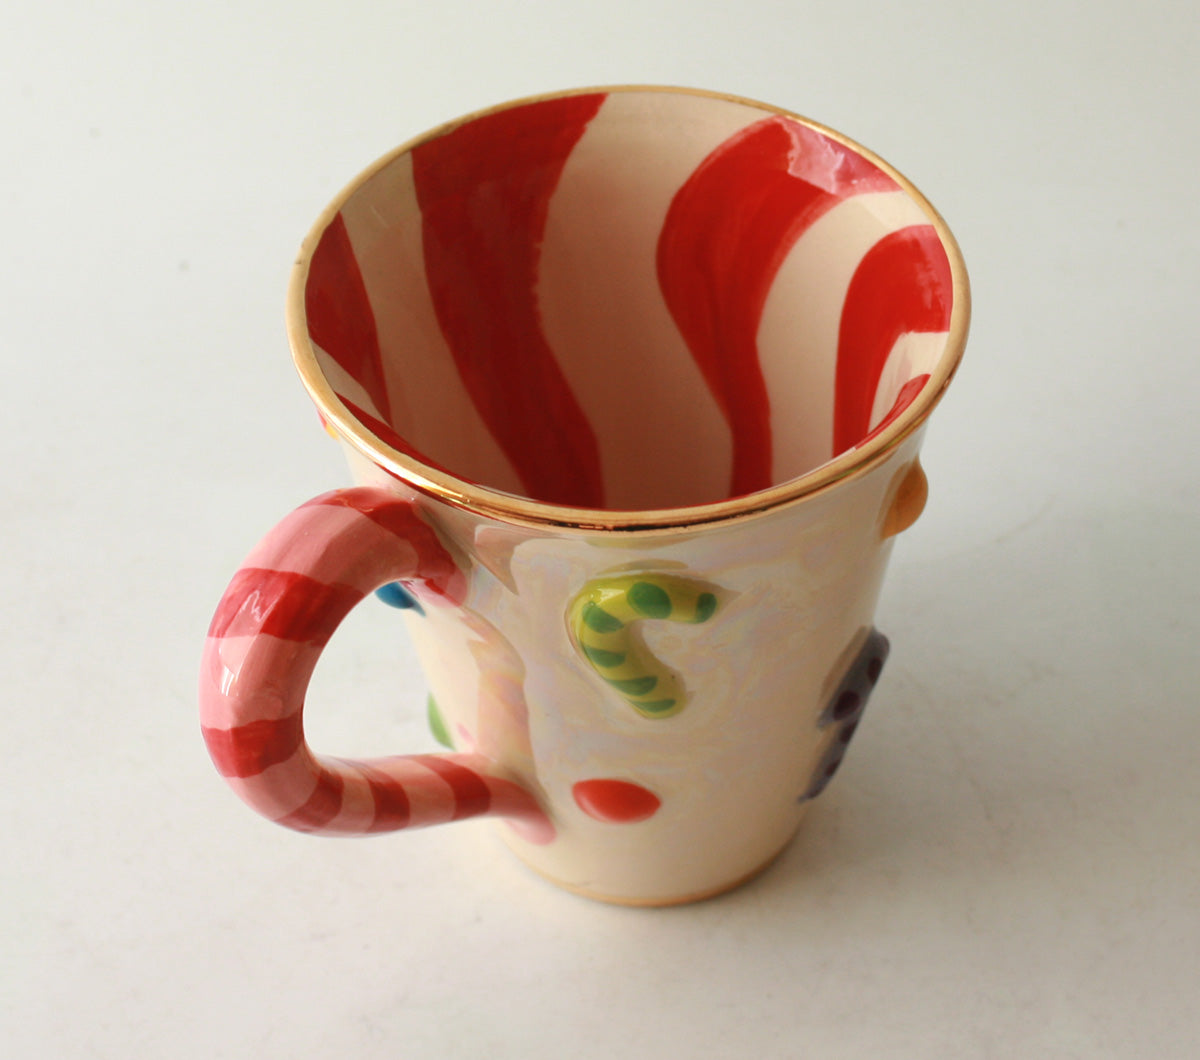 Candy Cane Mug with Red Stripes